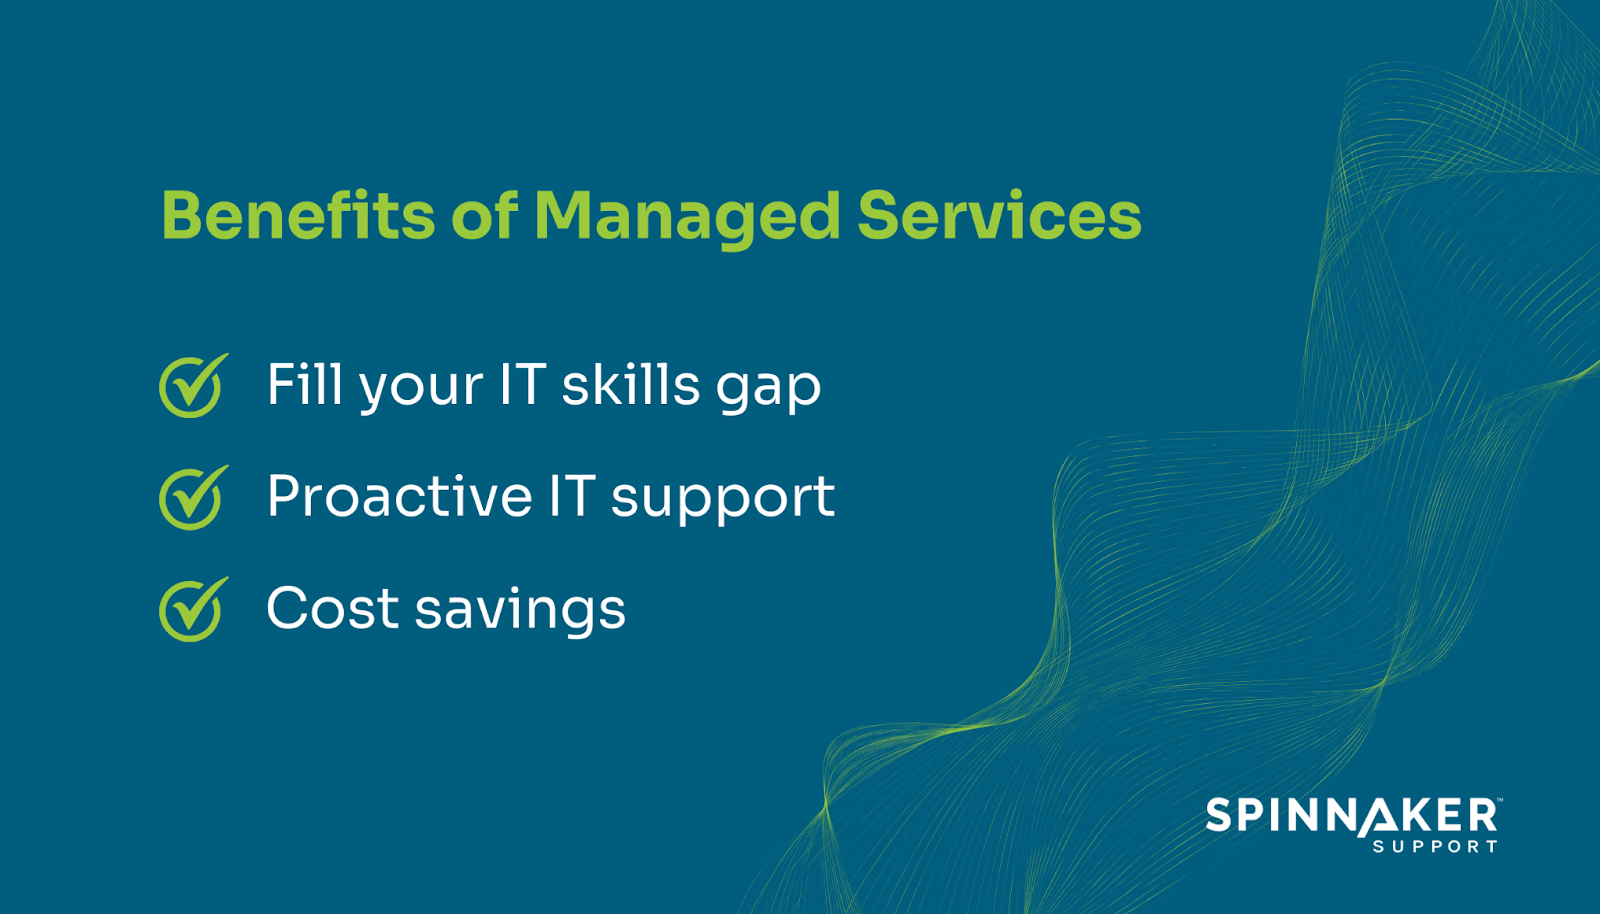 How to leverage managed services over traditional support models